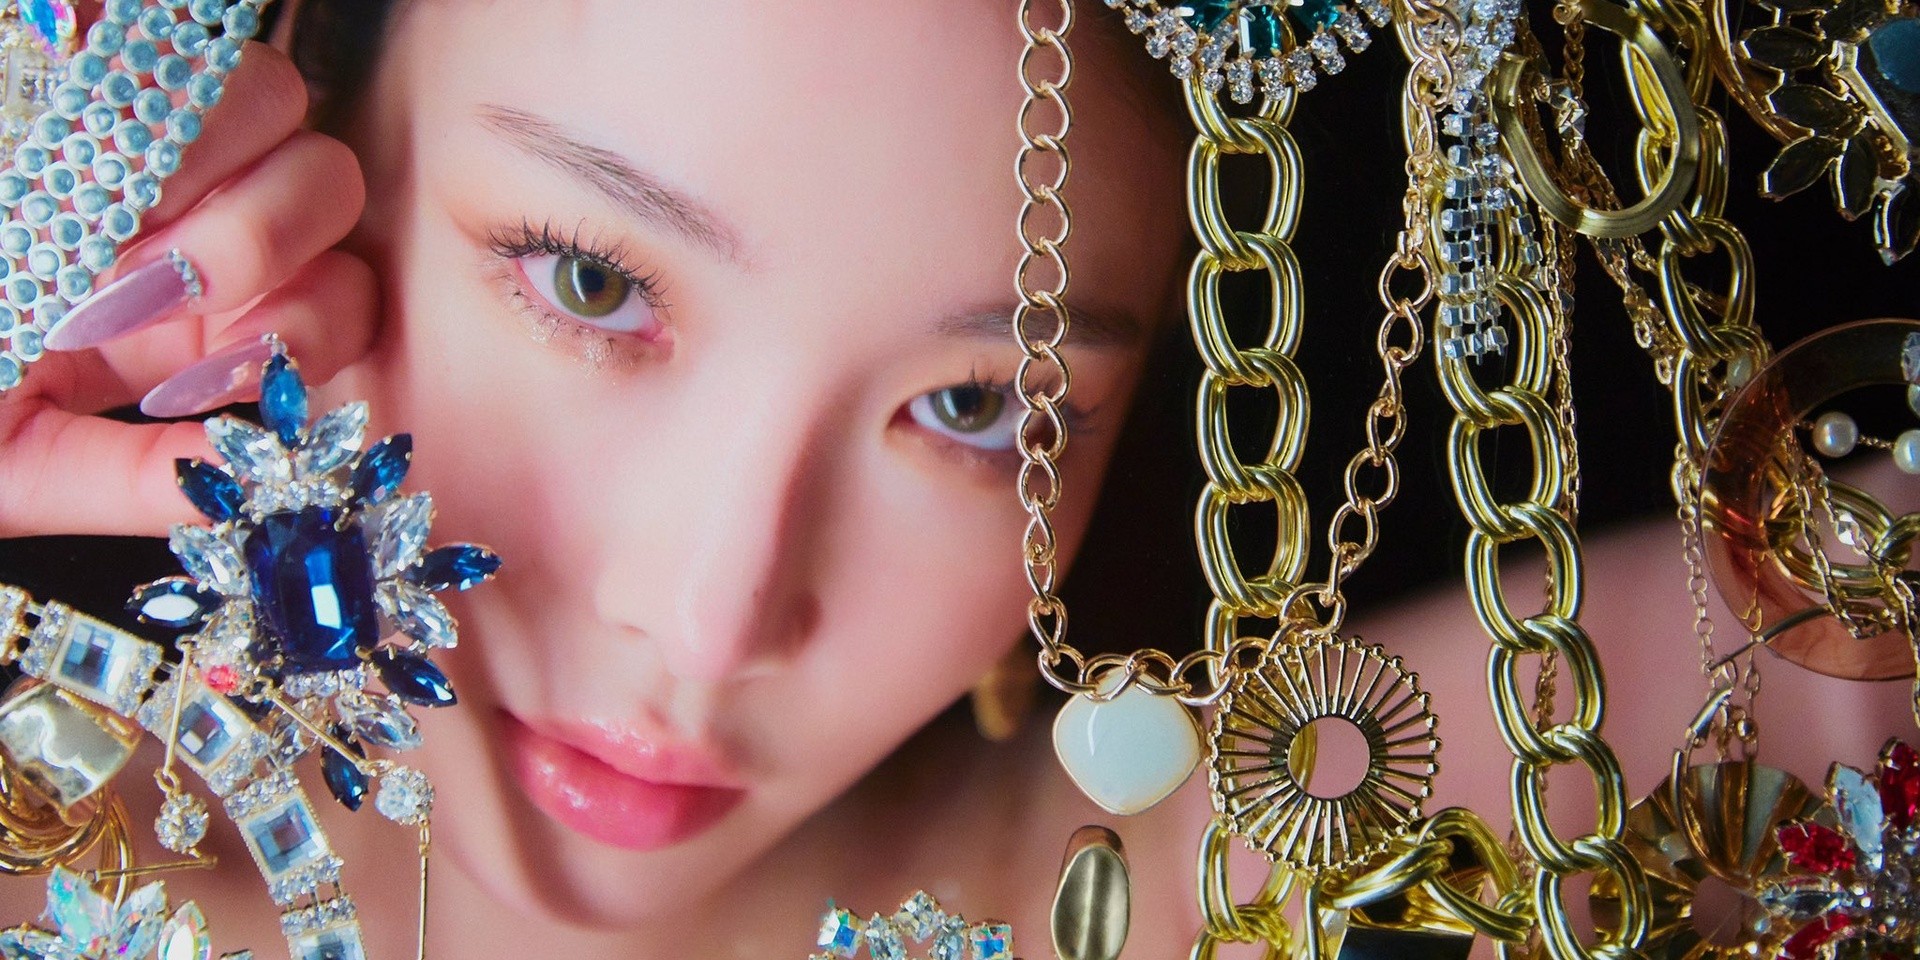 CHUNG HA makes a statement with first full-length album, QUERENCIA  – listen